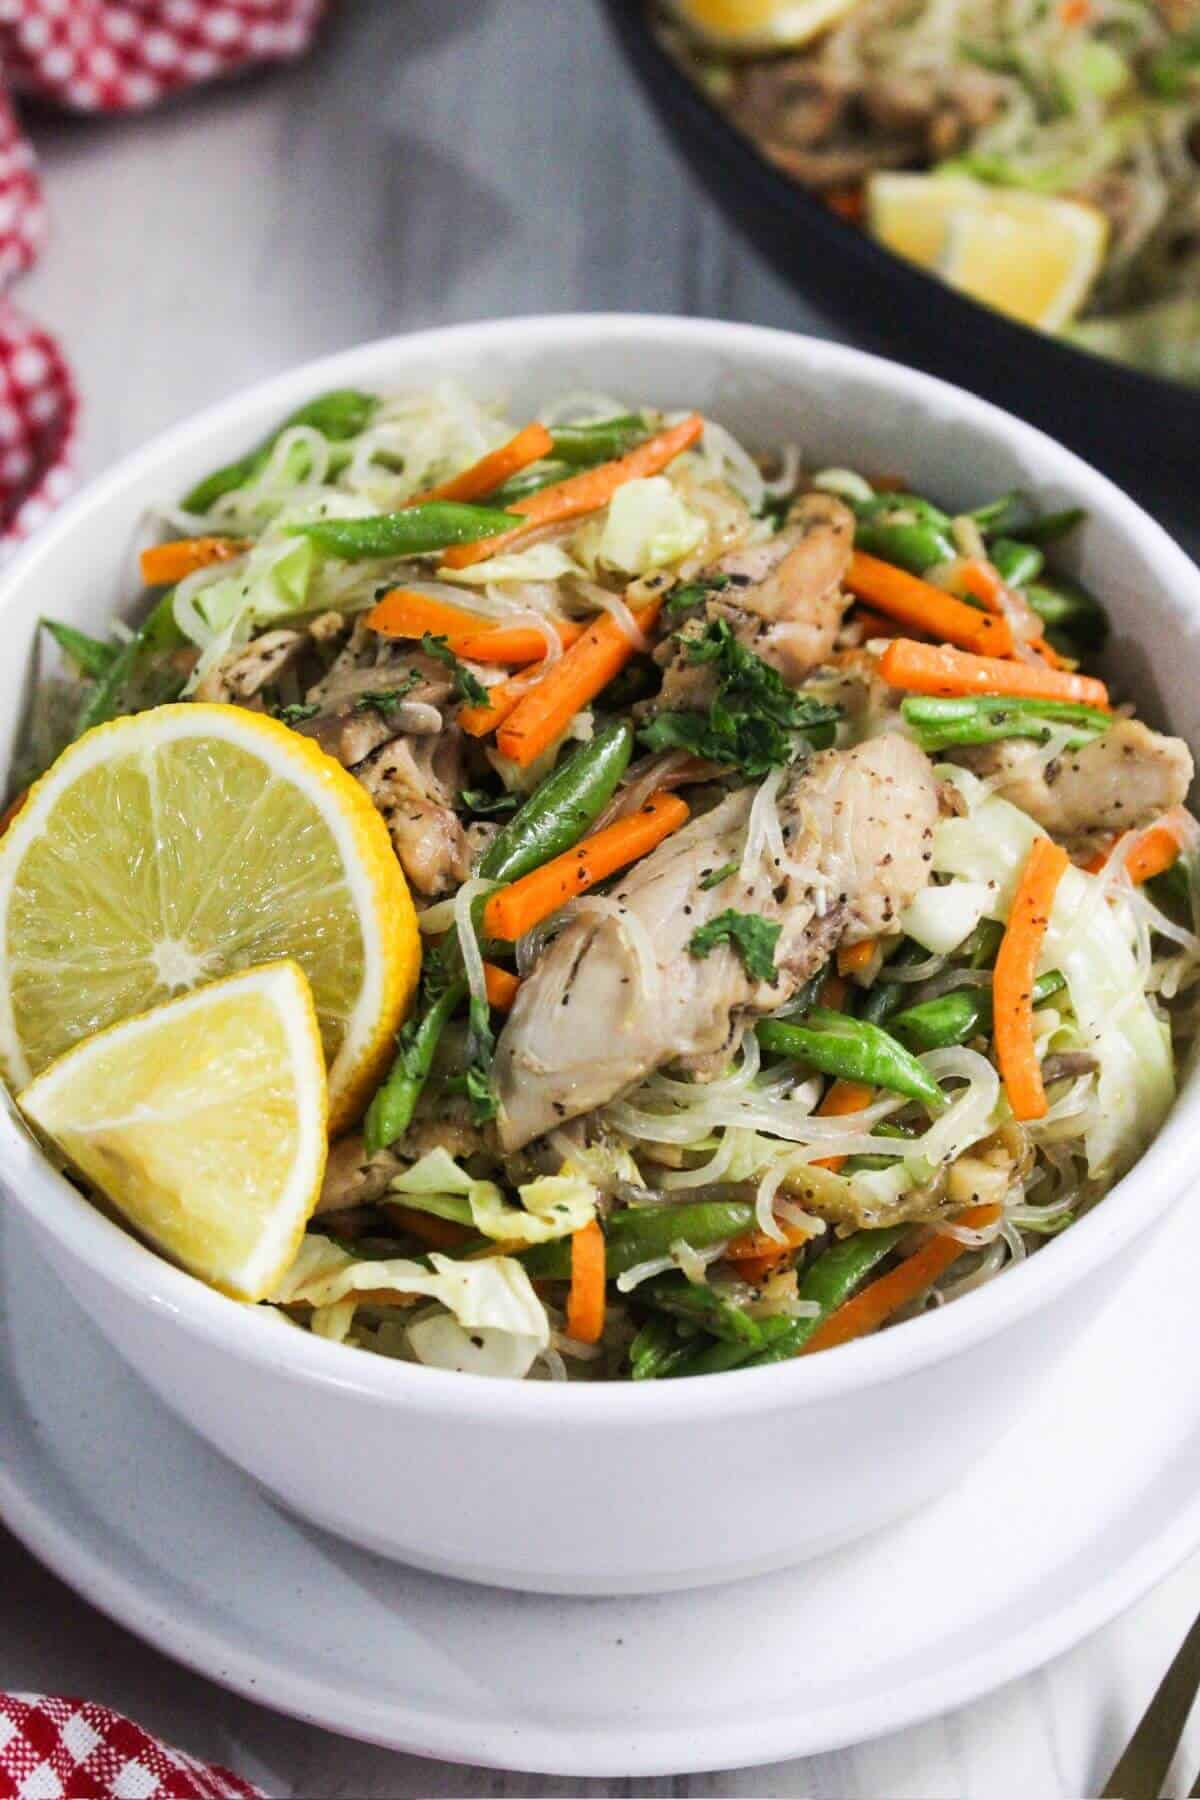 A white bowl with noodles, chicken, carrots, and lemon wedges.